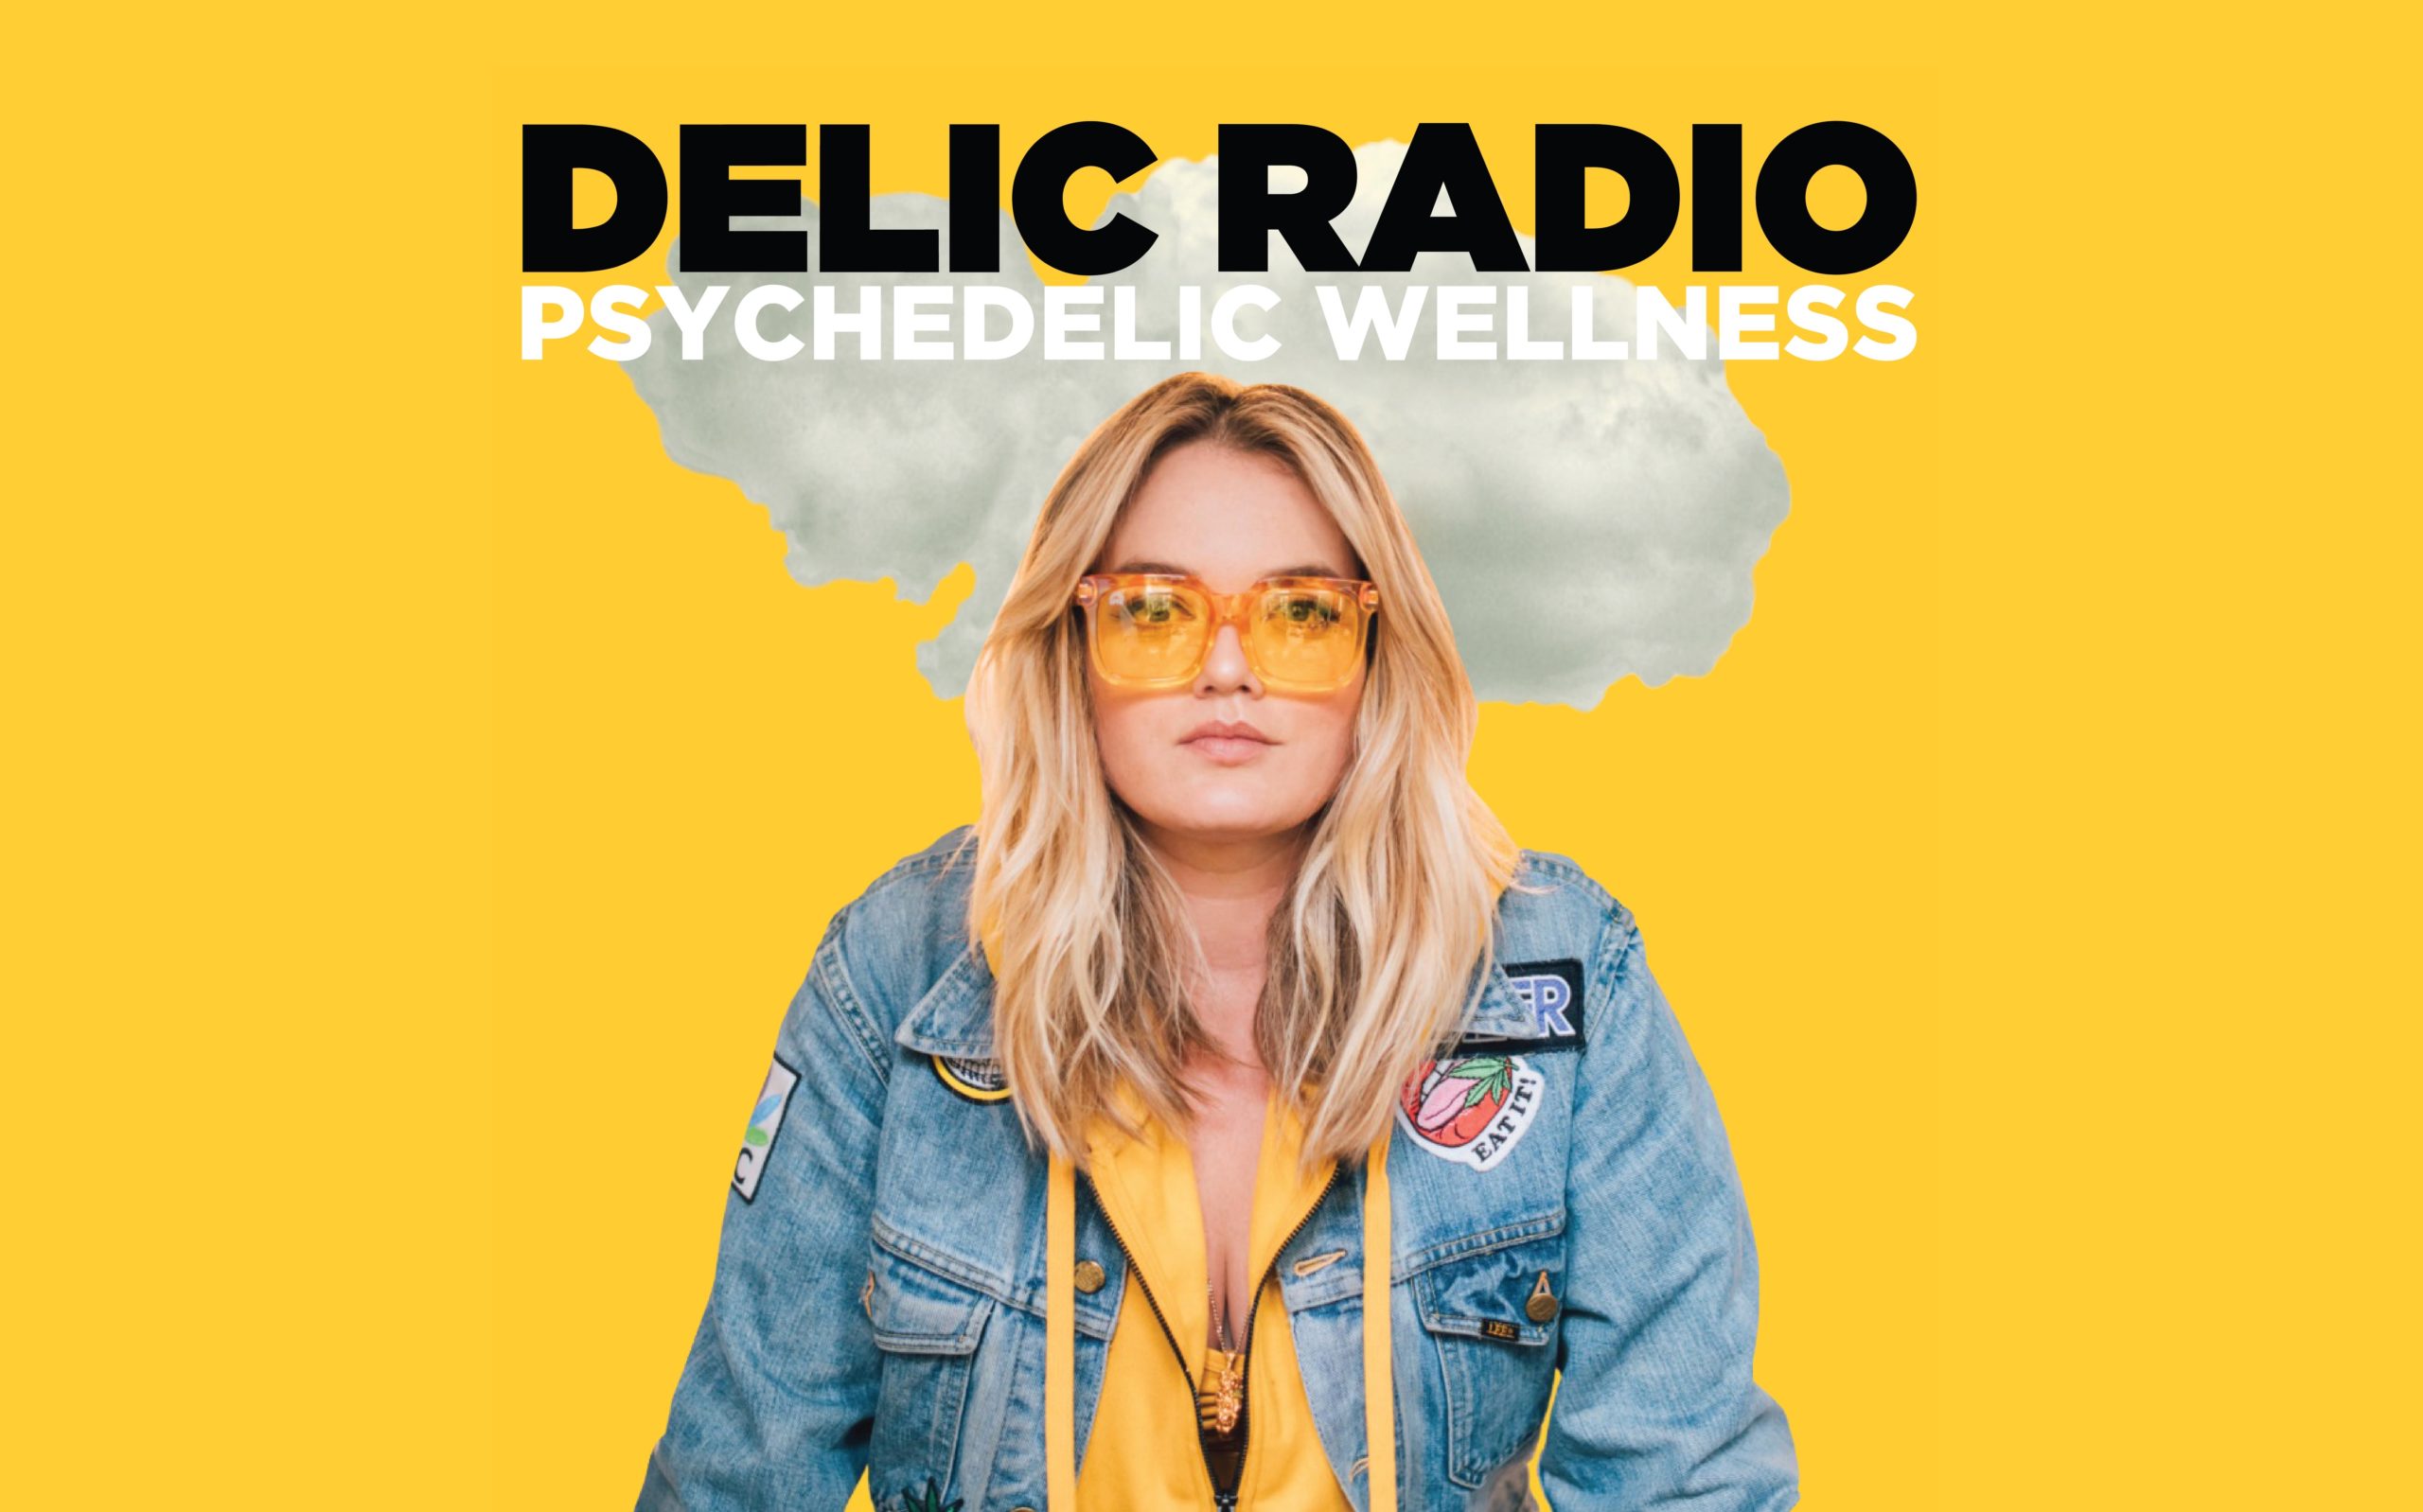 Delic Radio: Psychedelic Wellness is for Everyone